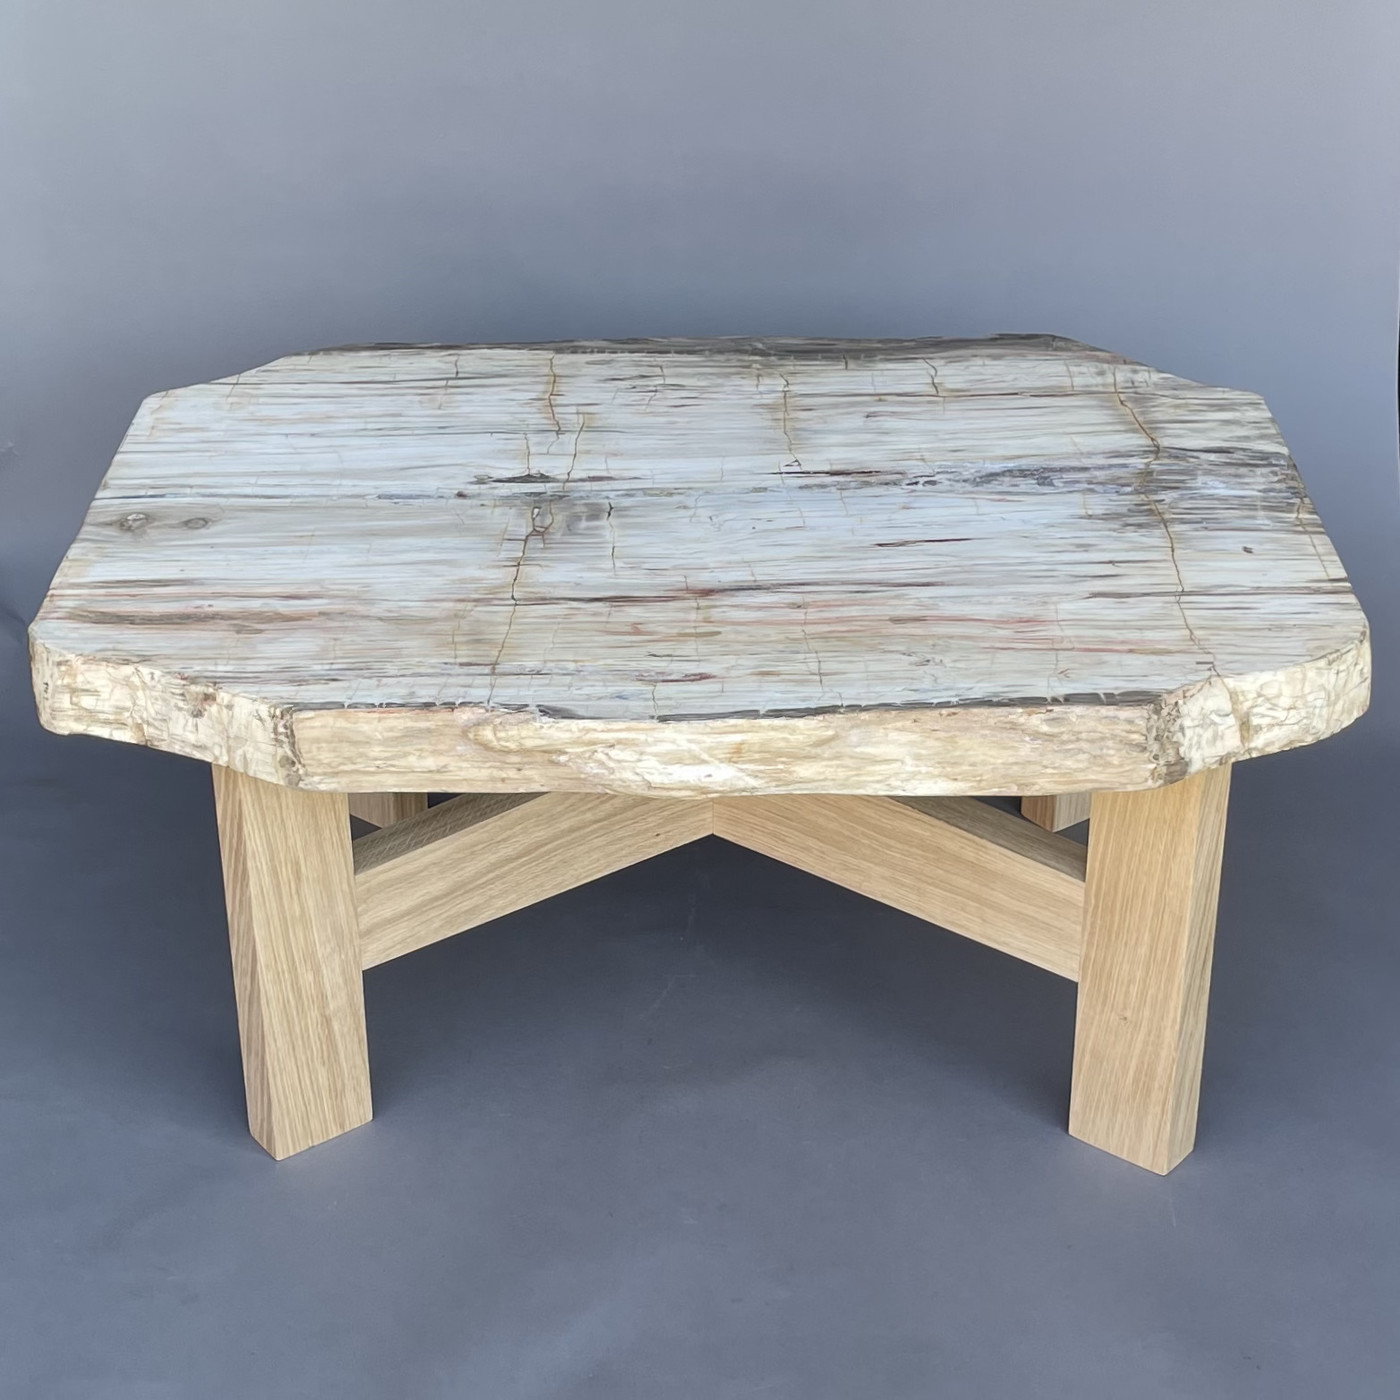 Coffee table with petrified wood top